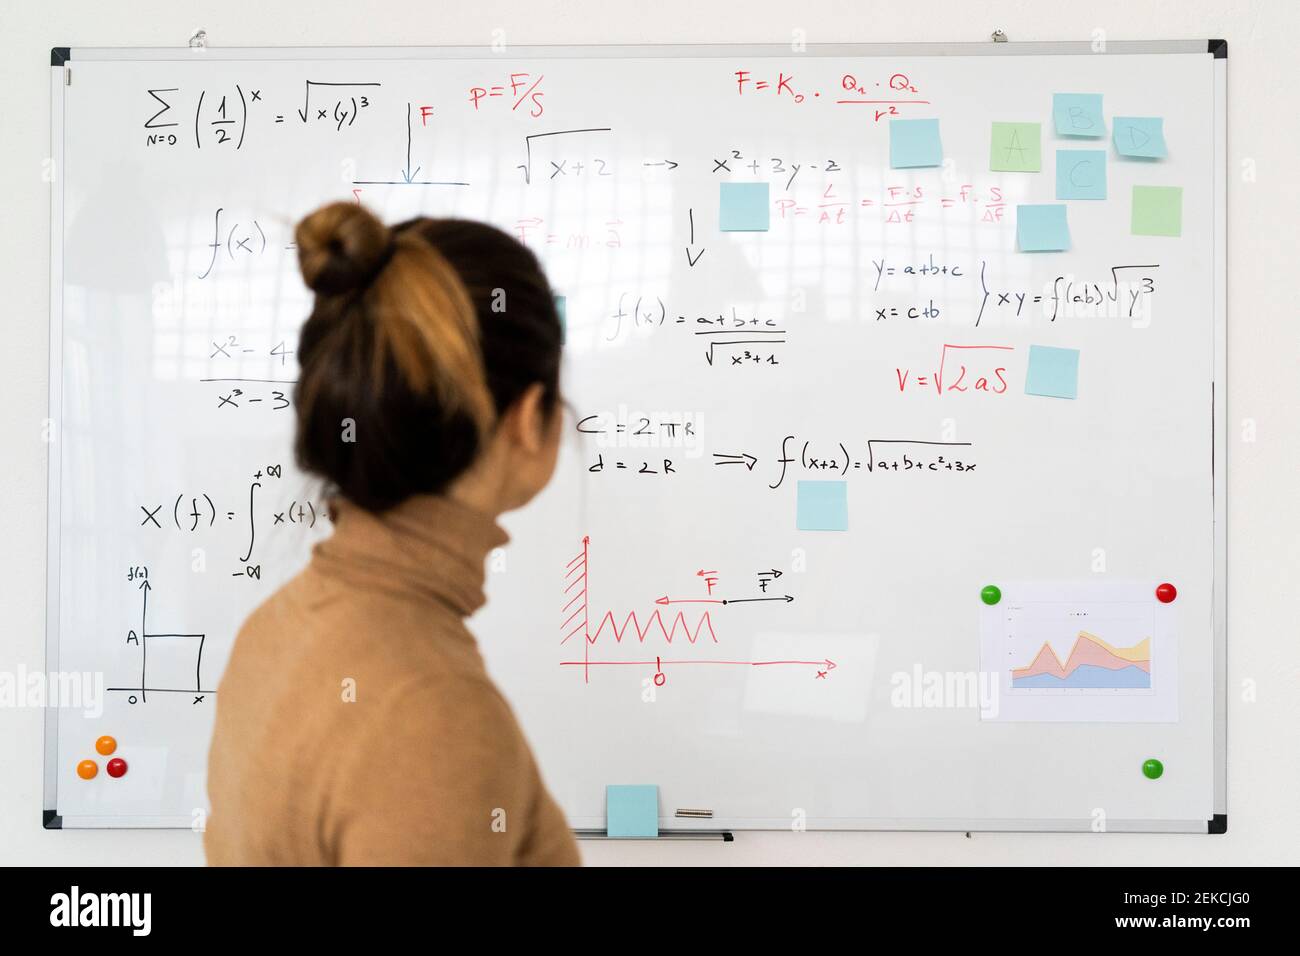 Woman analyzing mathematical formula written on whiteboard in living room Stock Photo